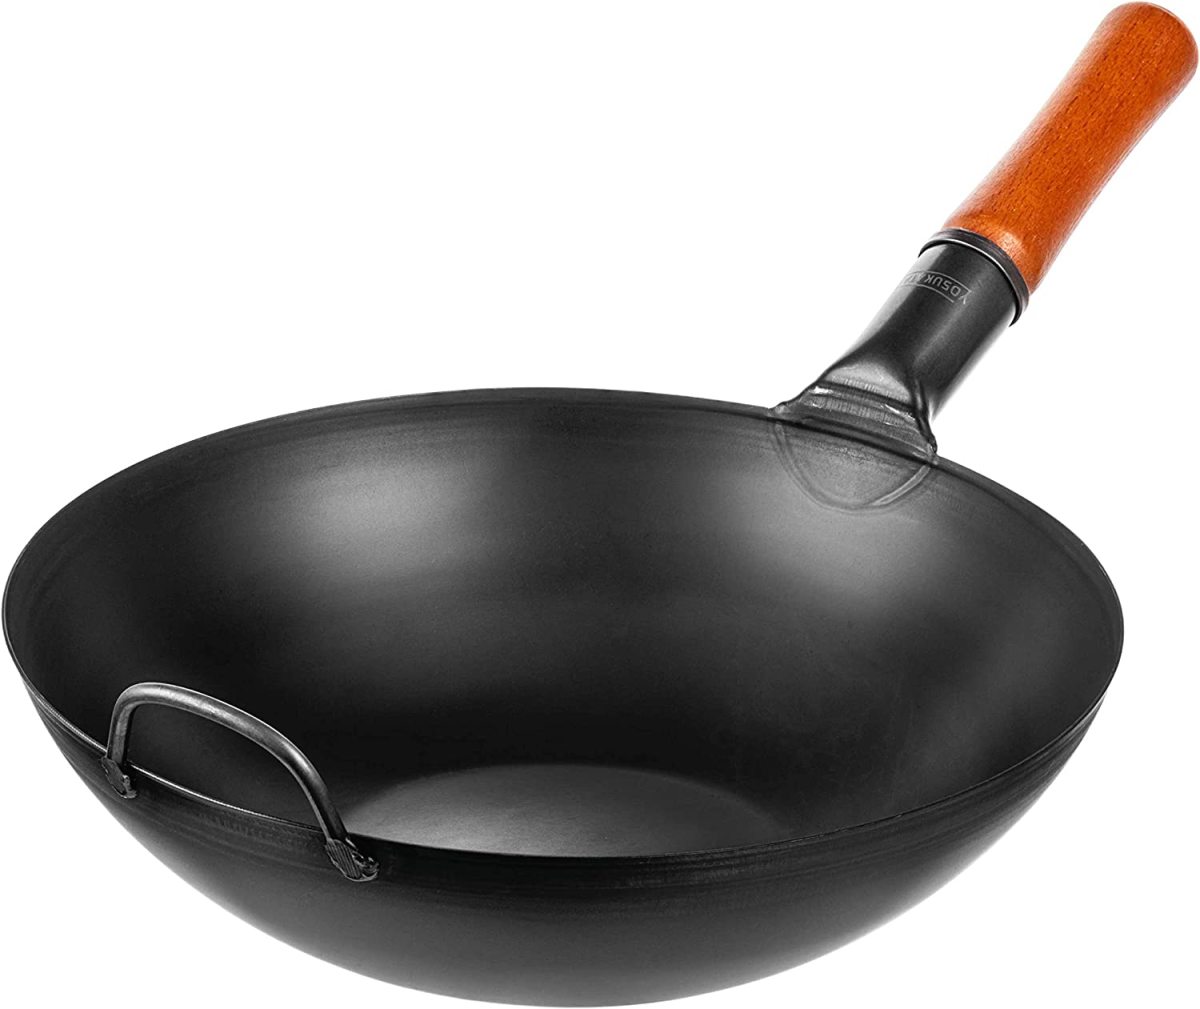 Souped Up Recipes Carbon Steel Wok for Electric Induction and GAS Stoves (Lid Spatula and User Guide Video Included)